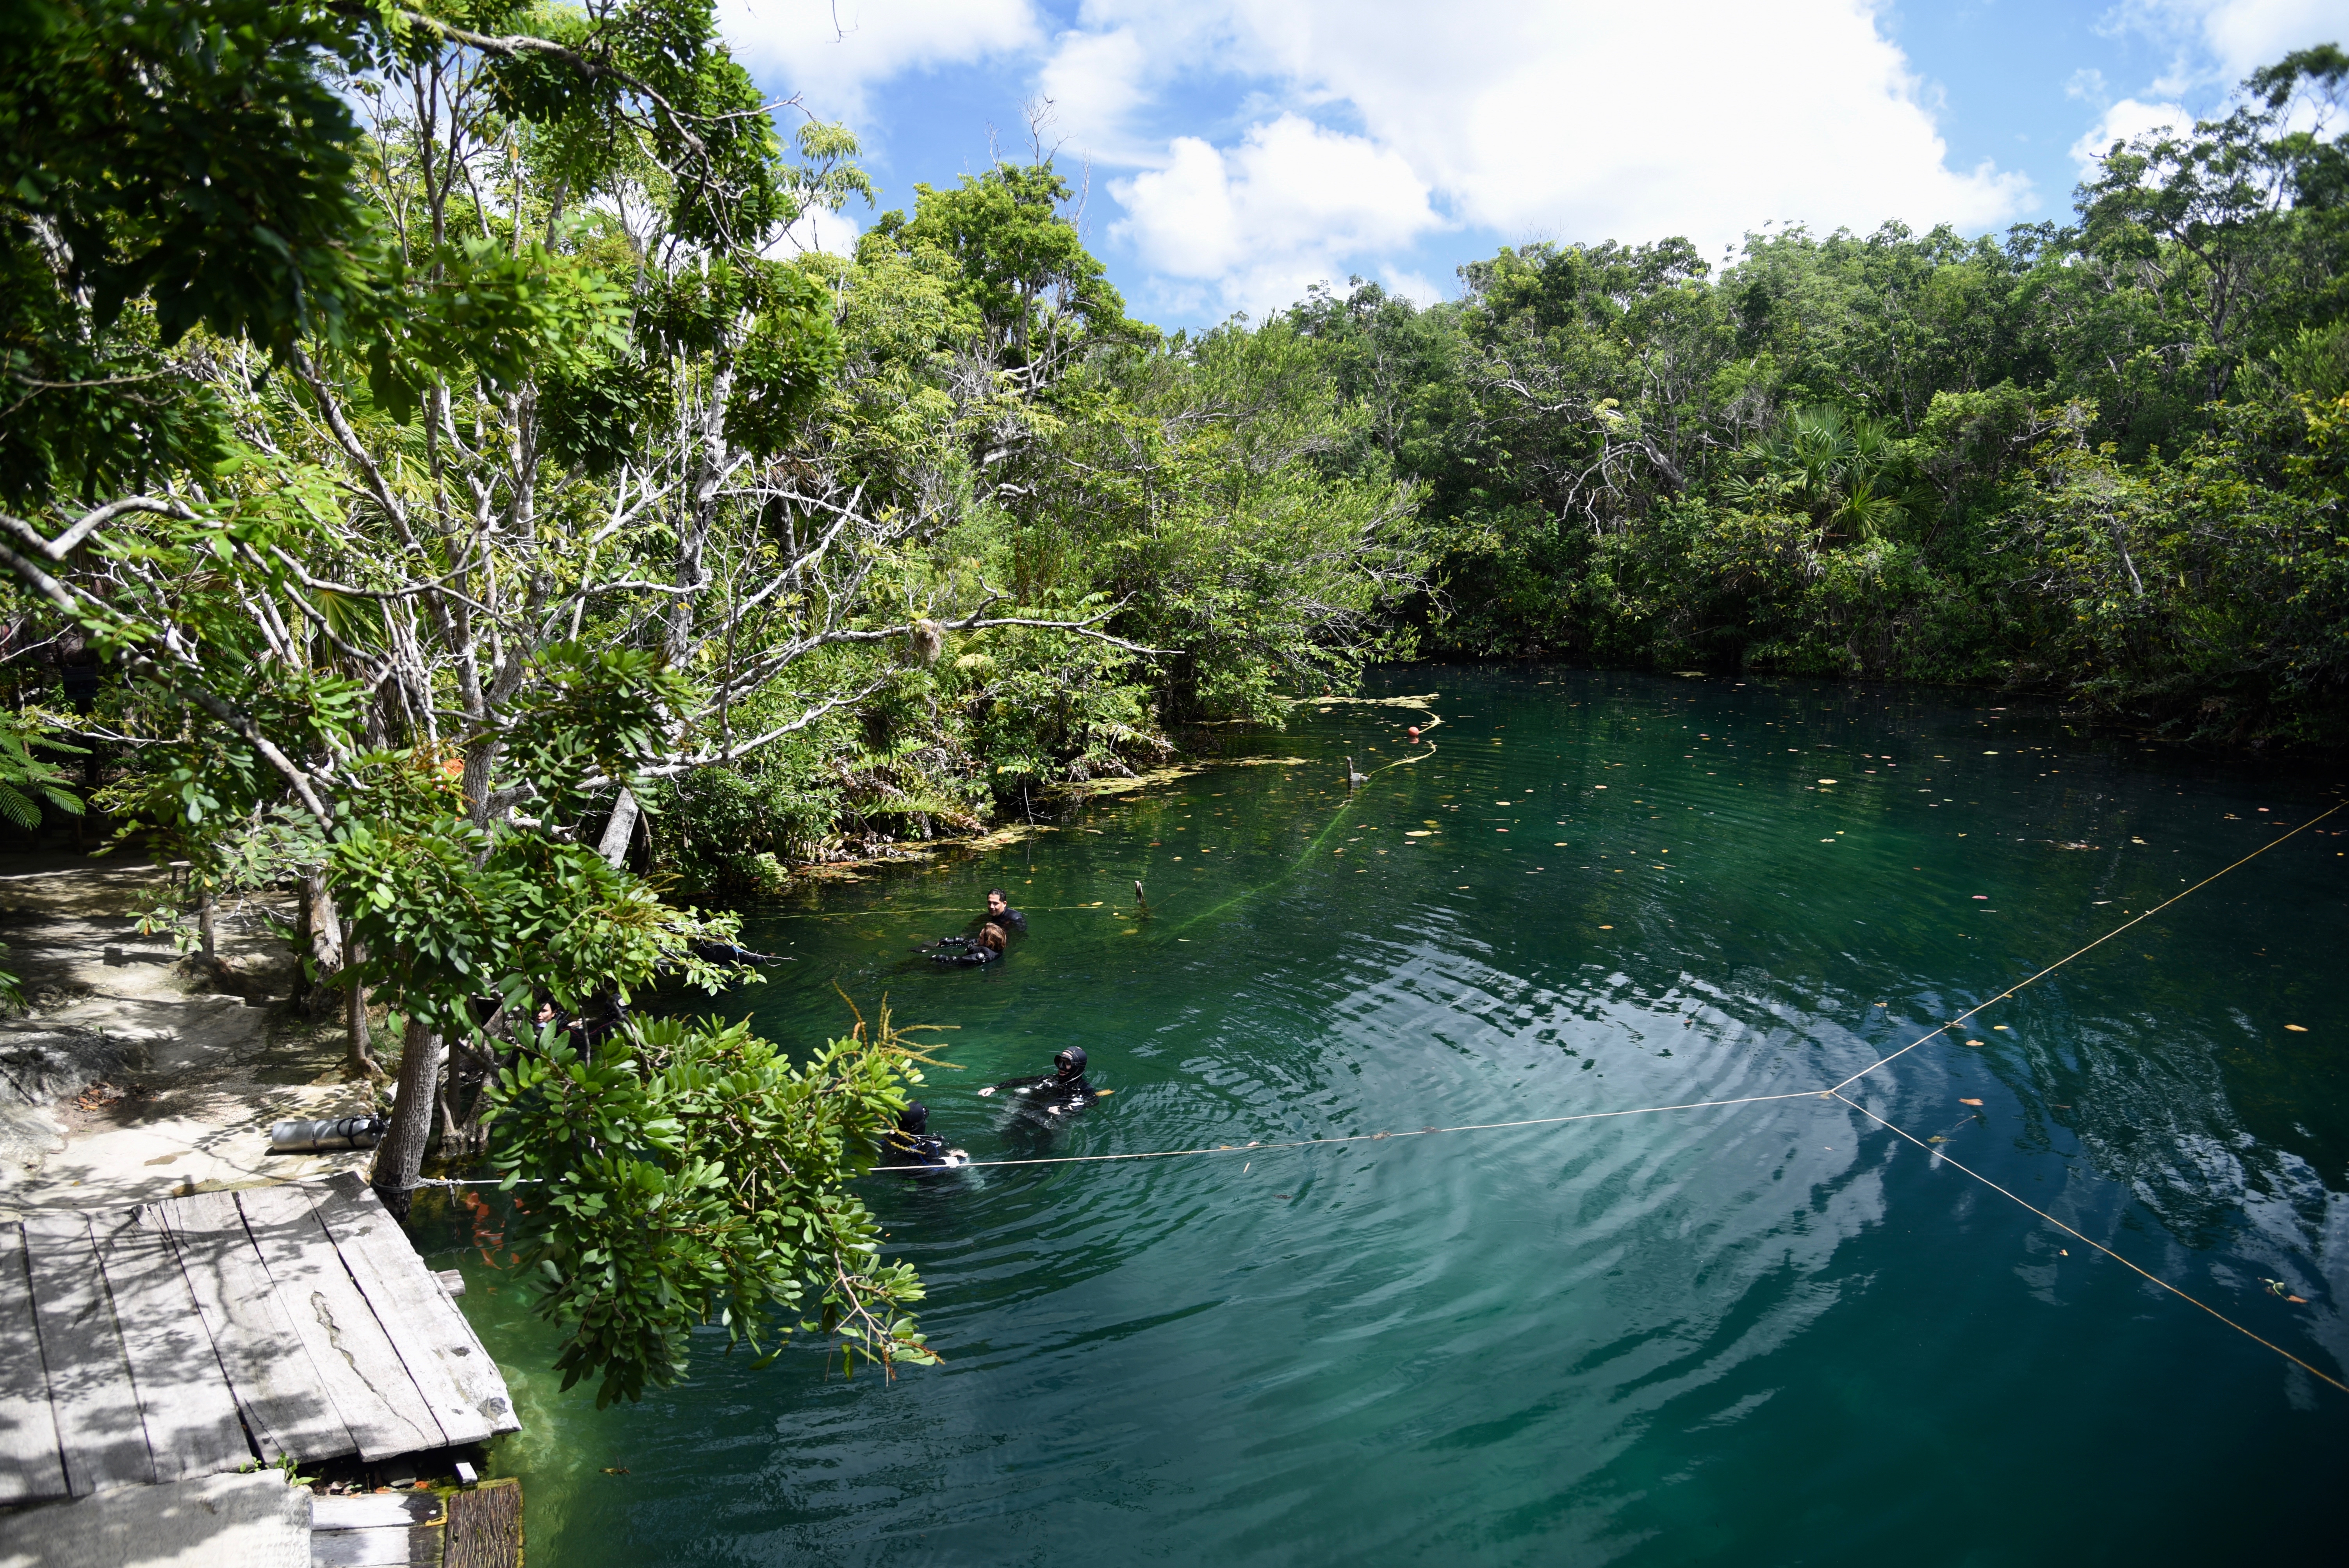 Divers in Carwash cenote. Photo by Pierre Constant